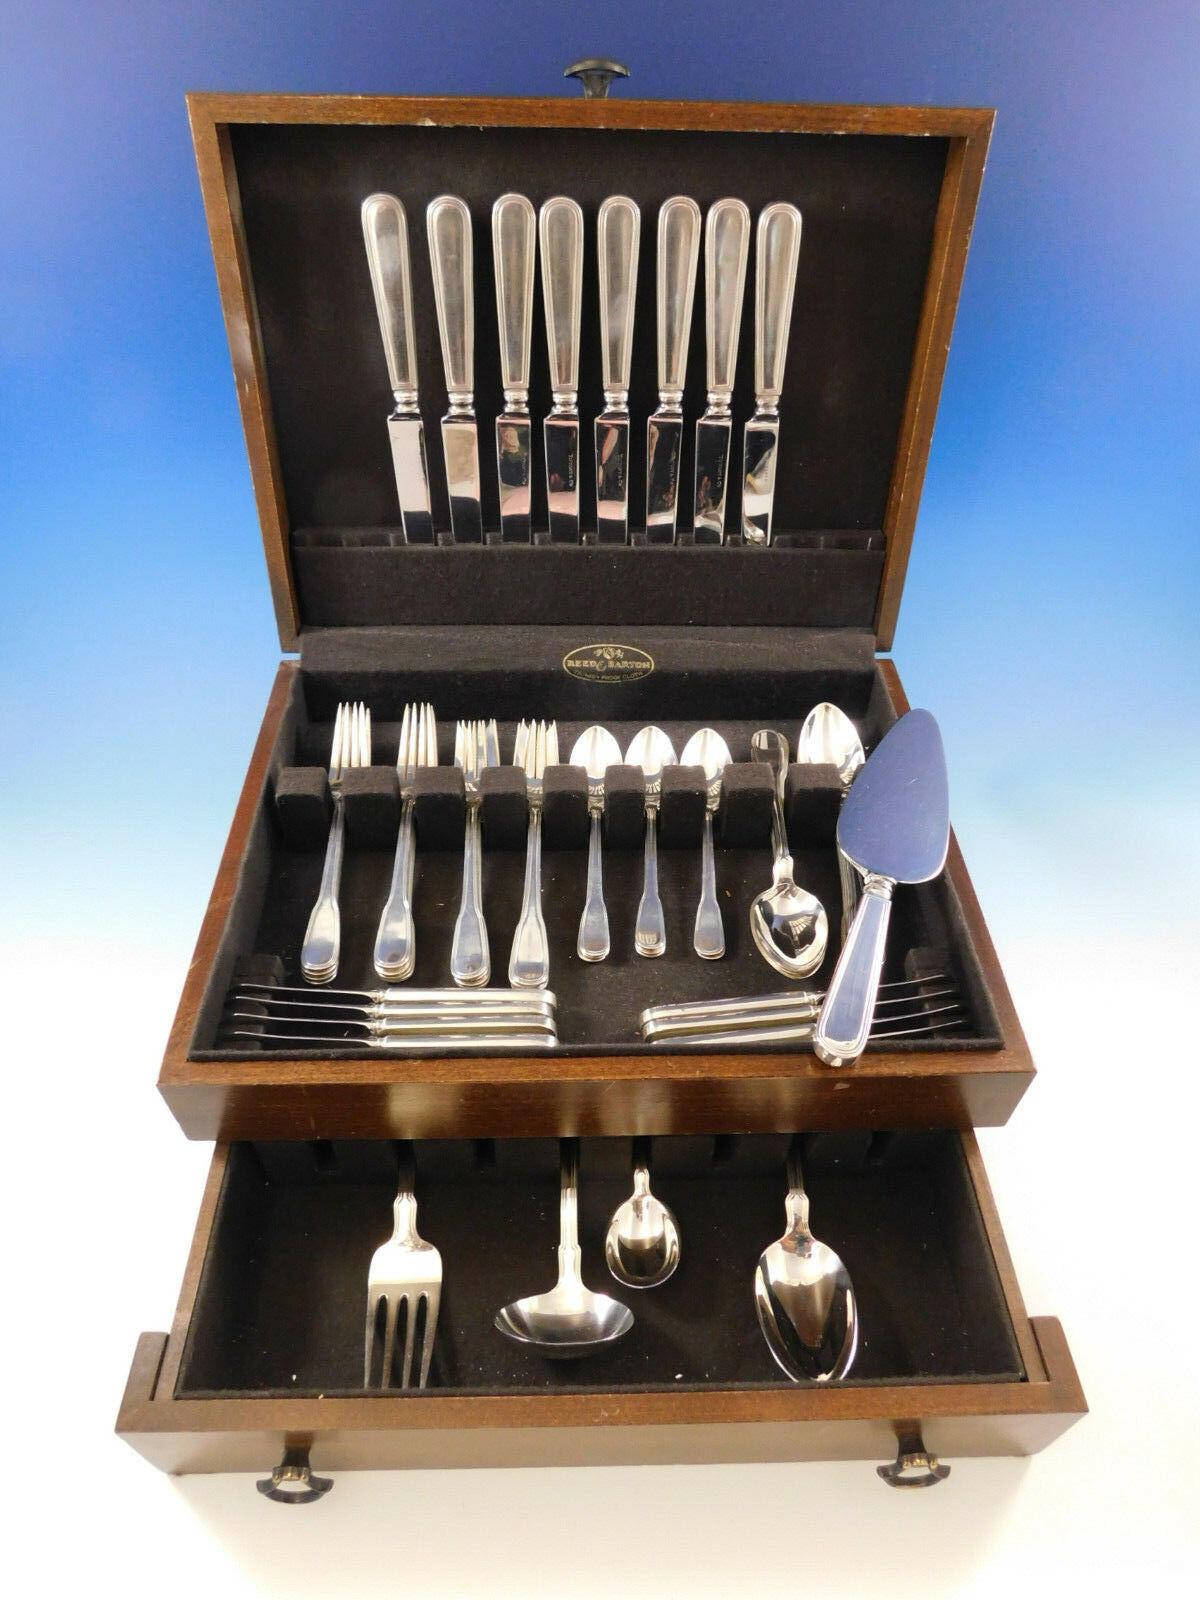 Superb Hamilton aka Gramercy by Tiffany & Co. sterling silver flatware set, 53 pieces with timeless threaded design. This set includes:

8 knives, 9 3/8